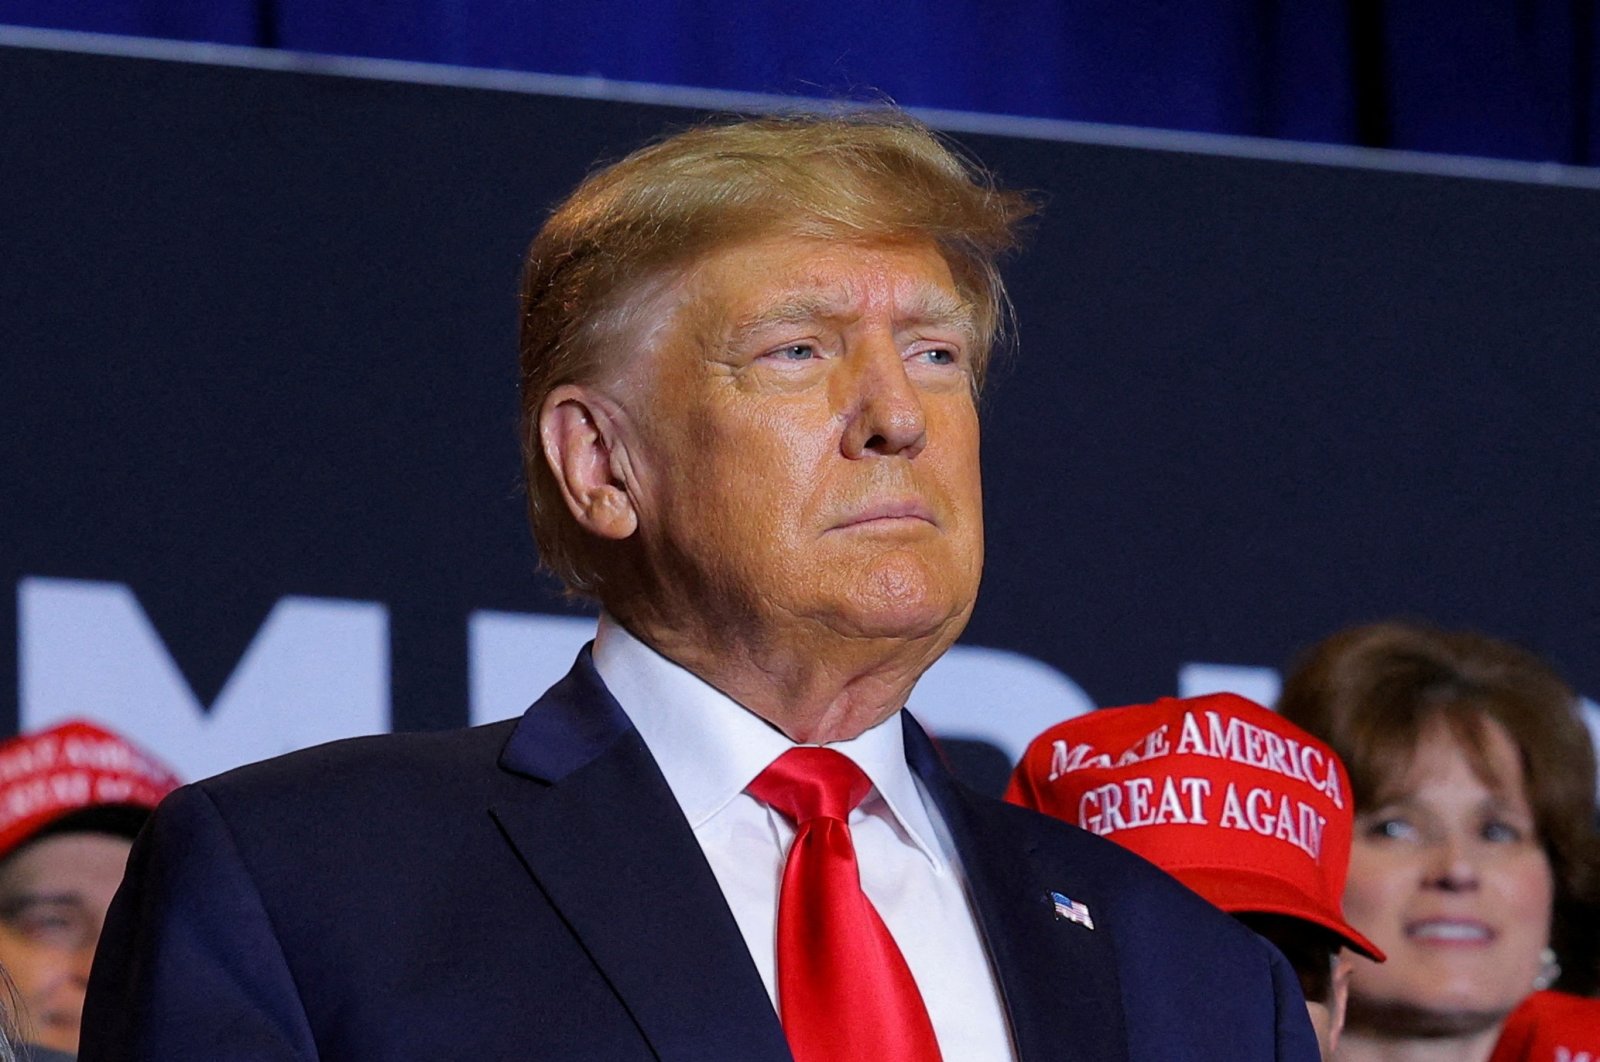 Former U.S. President and Republican presidential candidate Donald Trump attends a campaign event in Manchester, New Hampshire, U.S., April 27, 2023. (Reuters File Photo)